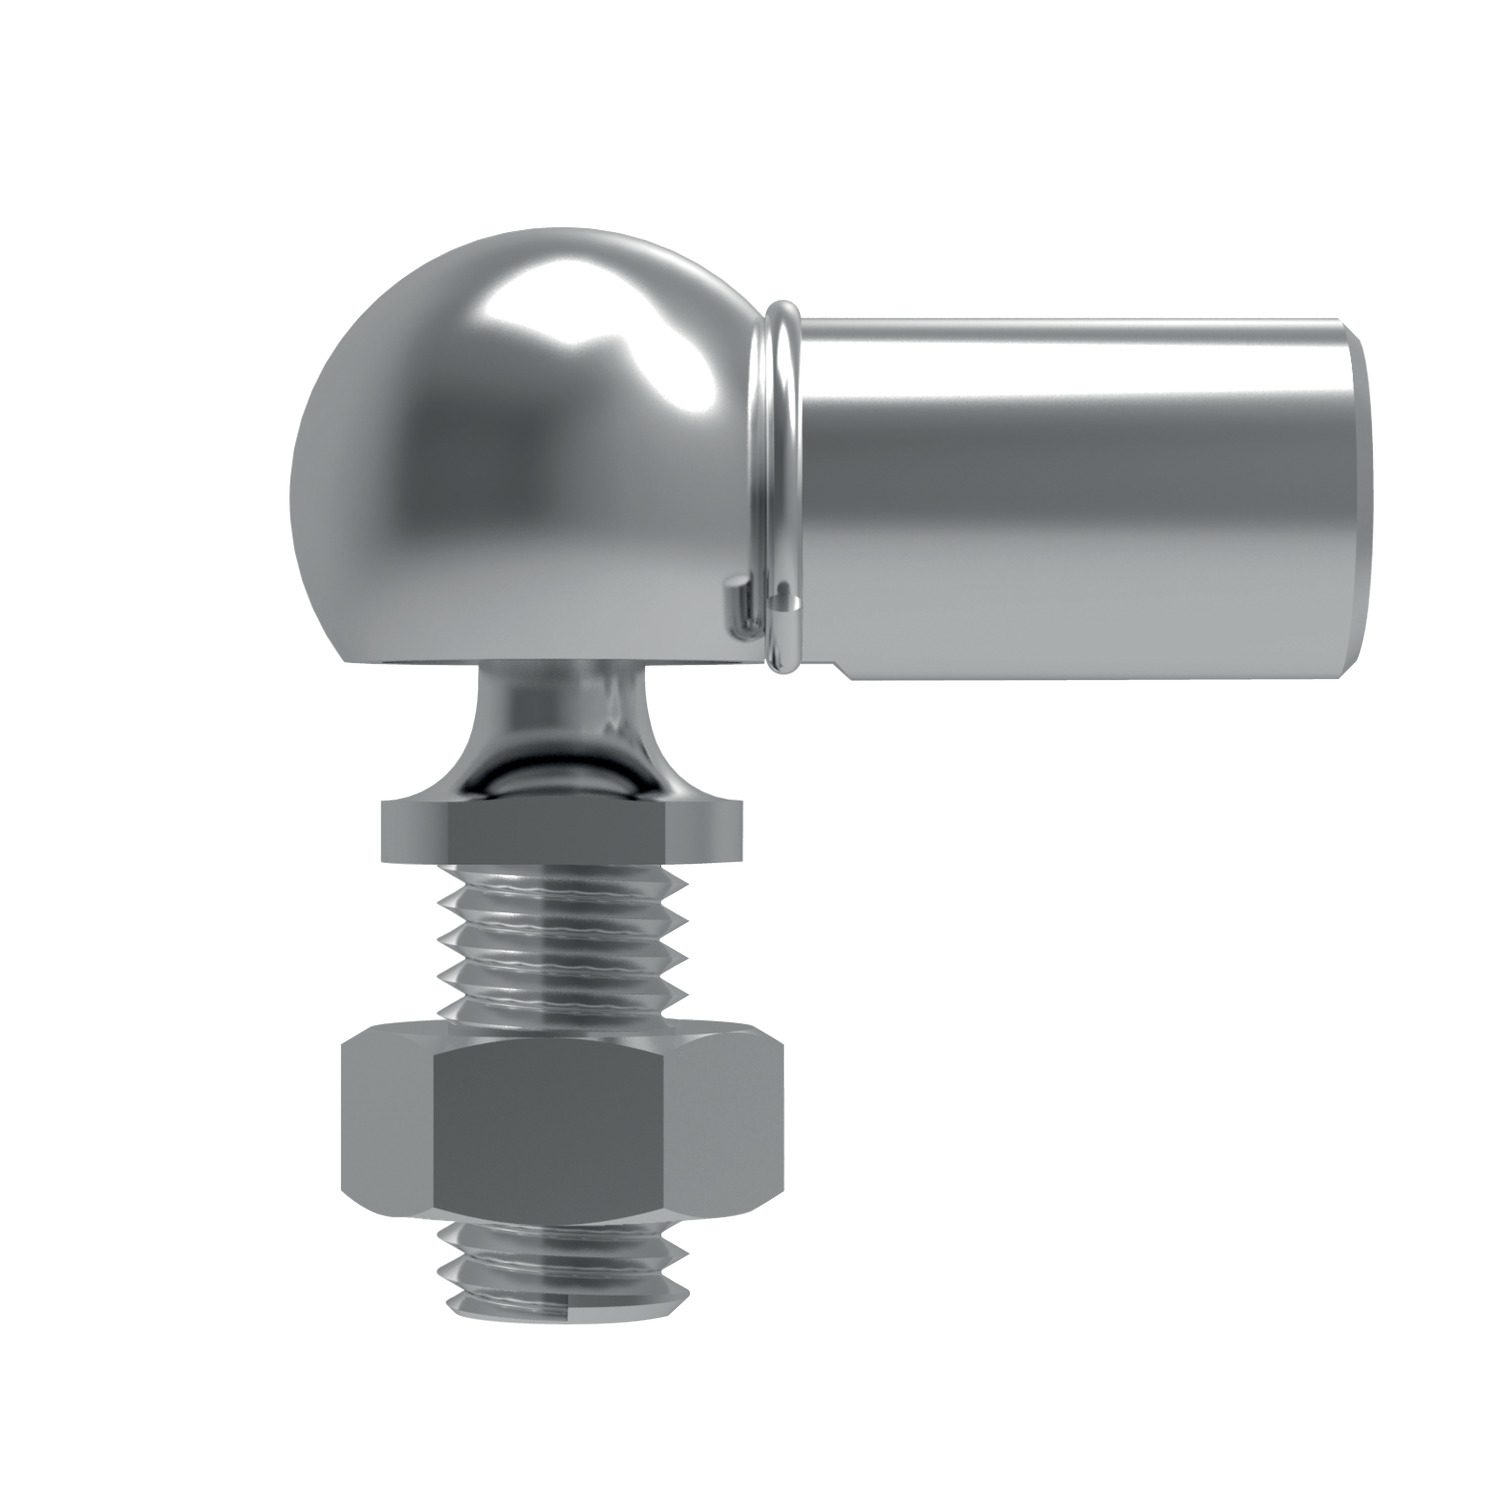 Product R3467, Stainless Ball and Socket Joints left hand thread / 